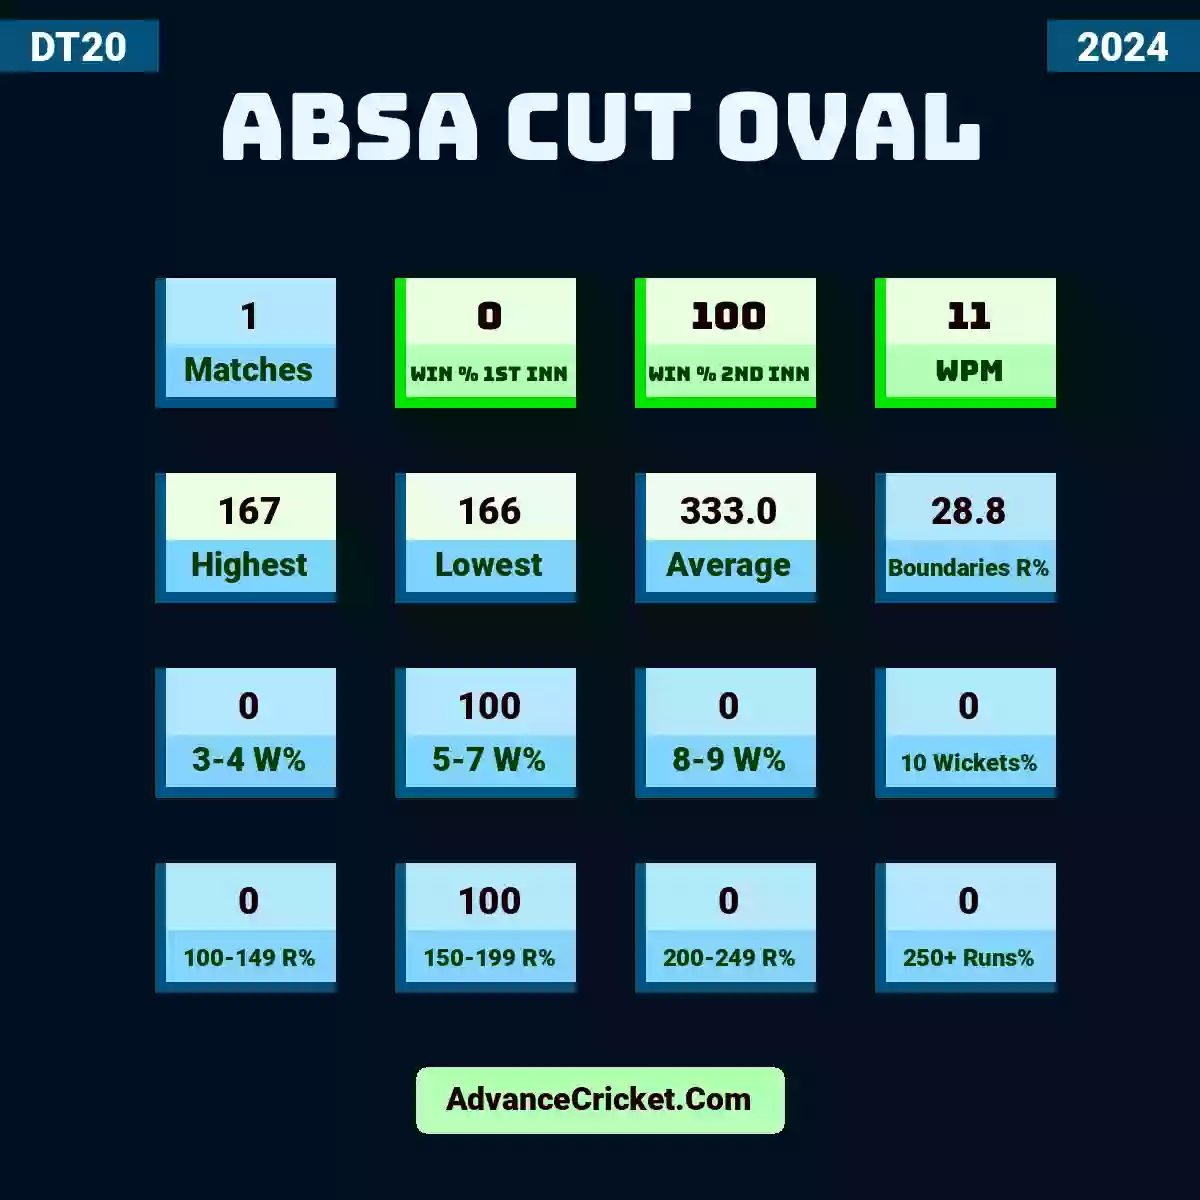 Image showing ABSA CUT Oval with Matches: 1, Win % 1st Inn: 0, Win % 2nd Inn: 100, WPM: 11, Highest: 167, Lowest: 166, Average: 333.0, Boundaries R%: 28.8, 3-4 W%: 0, 5-7 W%: 100, 8-9 W%: 0, 10 Wickets%: 0, 100-149 R%: 0, 150-199 R%: 100, 200-249 R%: 0, 250+ Runs%: 0.